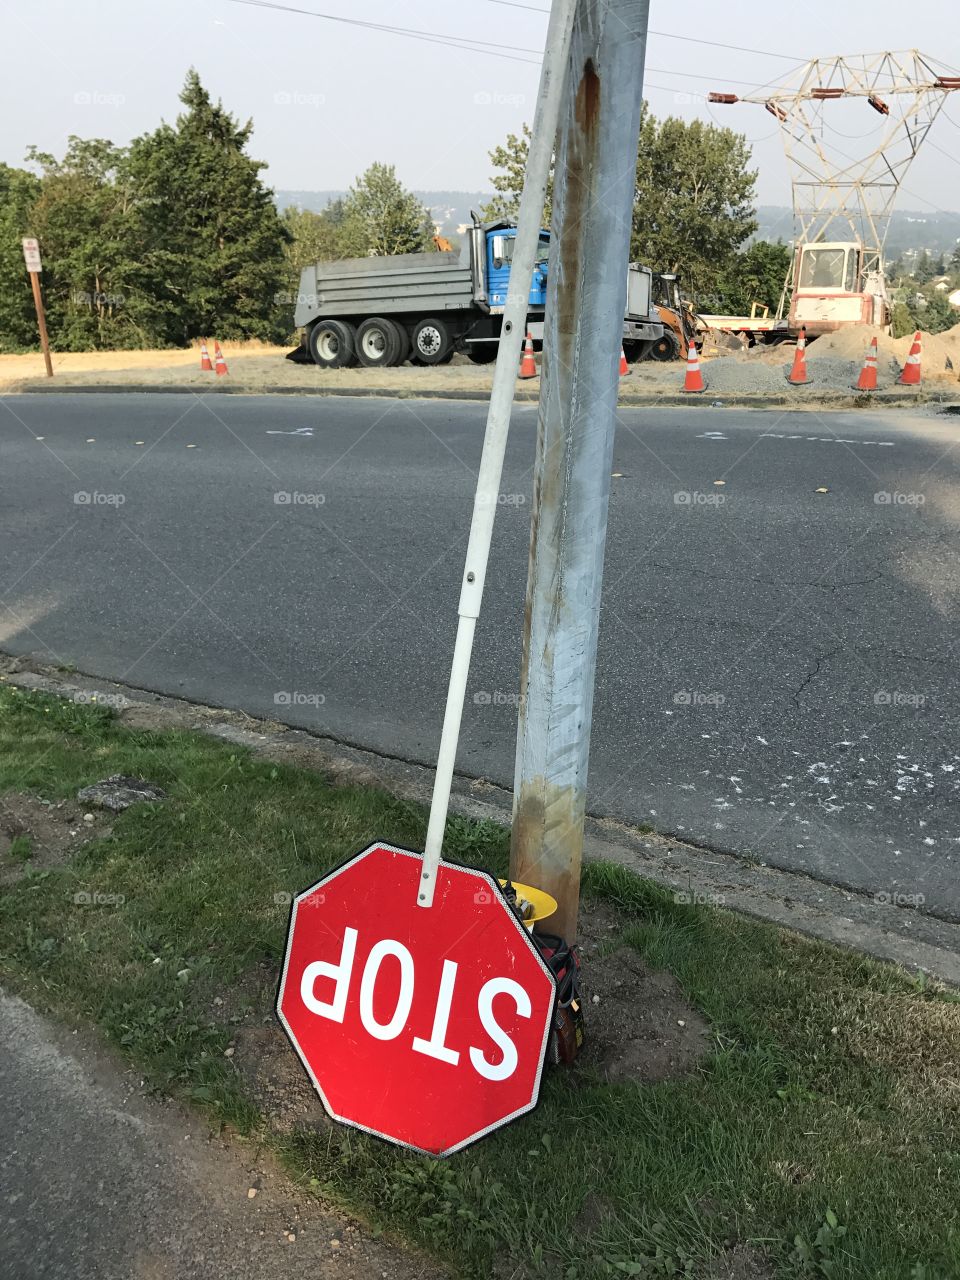 Upside down stop sign